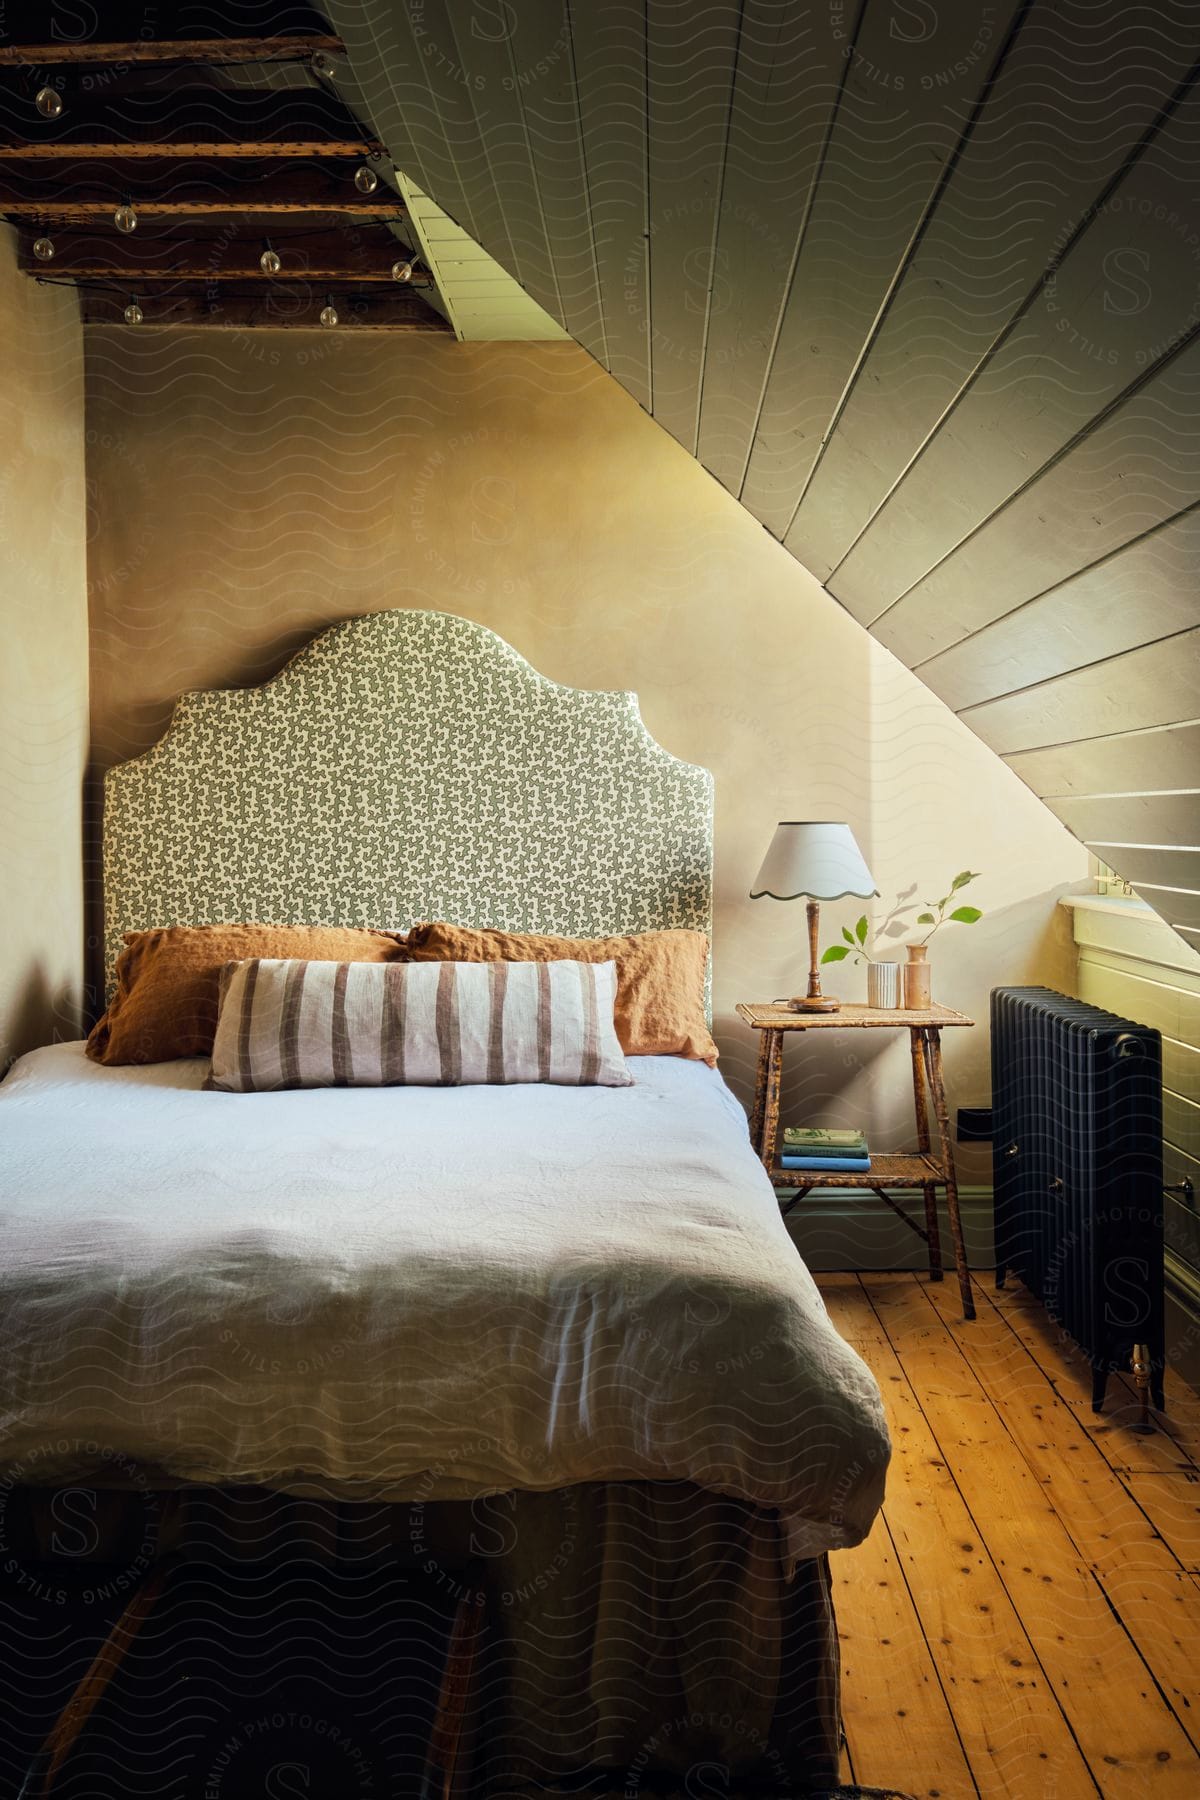 A bedroom with a slanted wooden plank ceiling hardwood floors and a tall fabric headboard